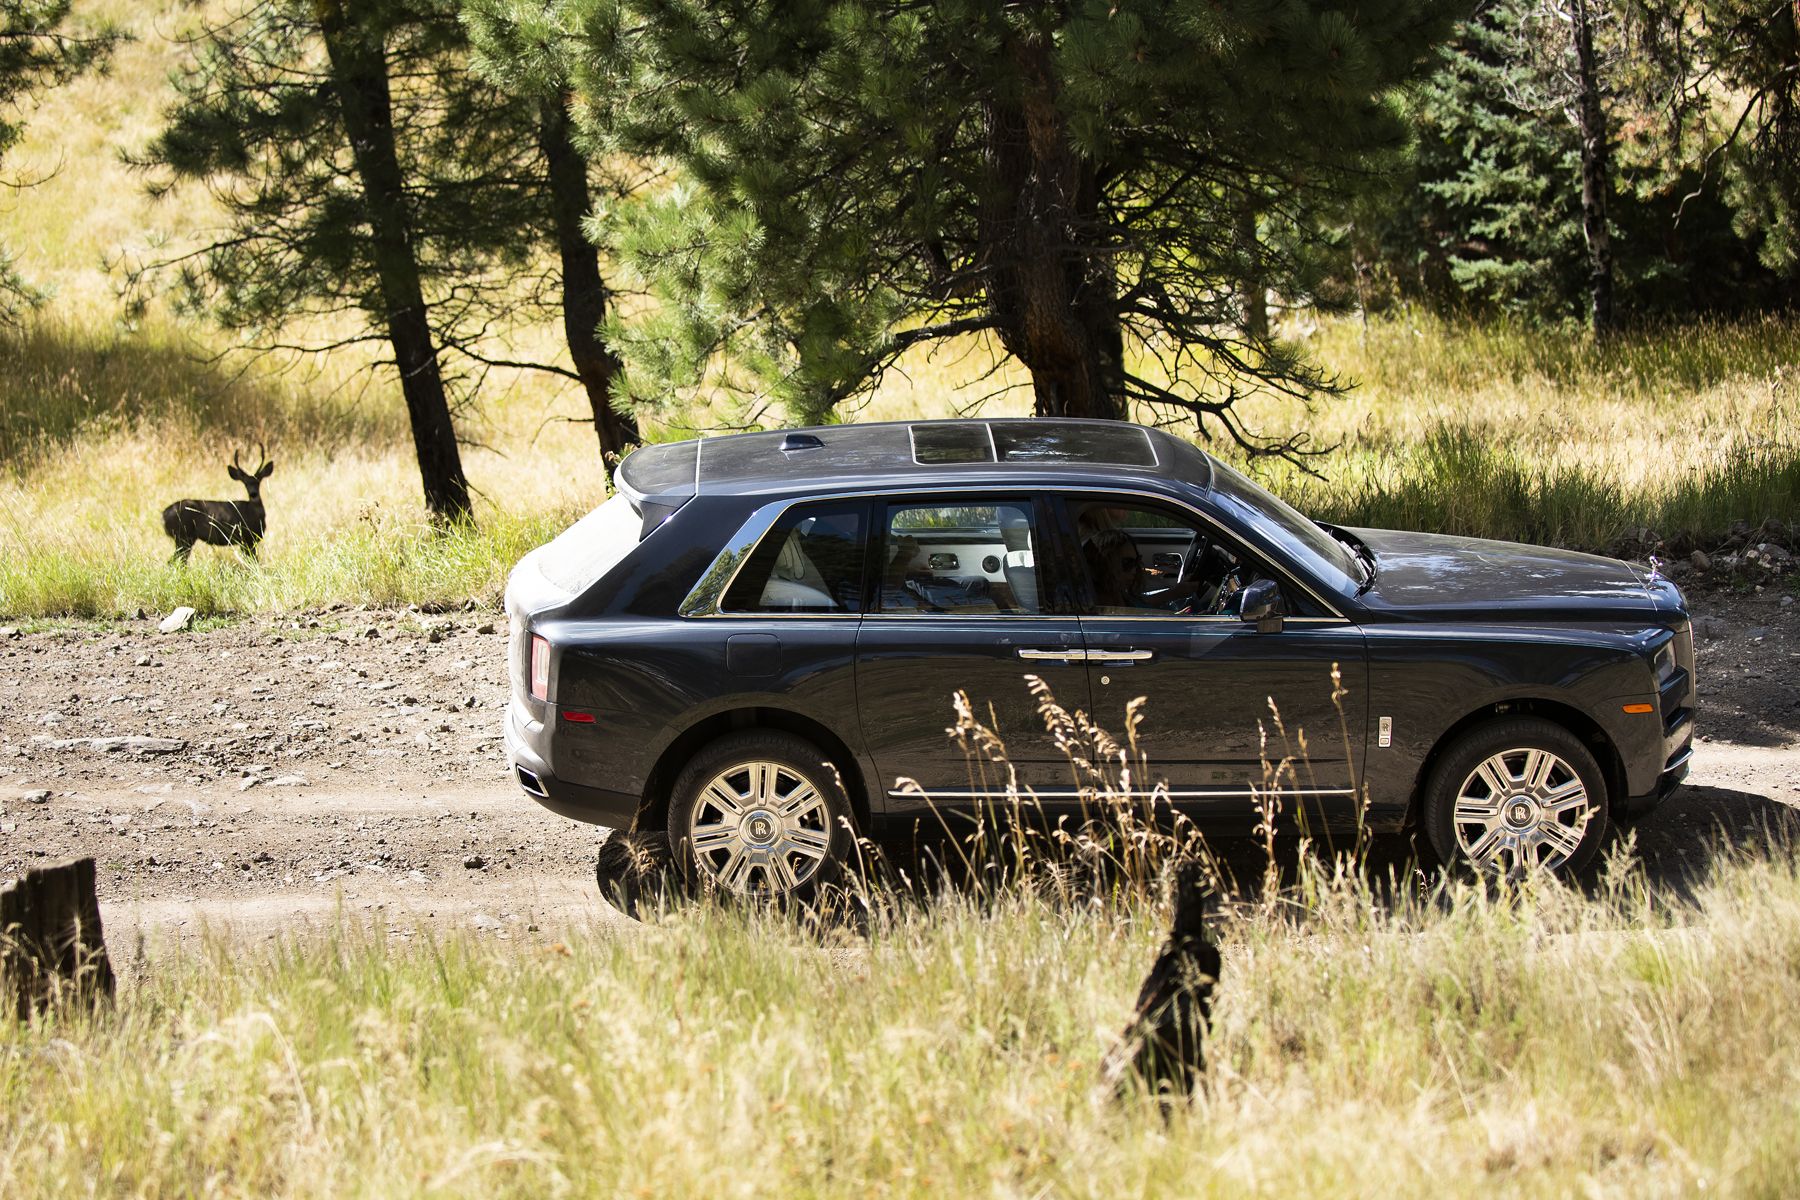 2022 Rolls-Royce Cullinan Review  Three things I learned driving